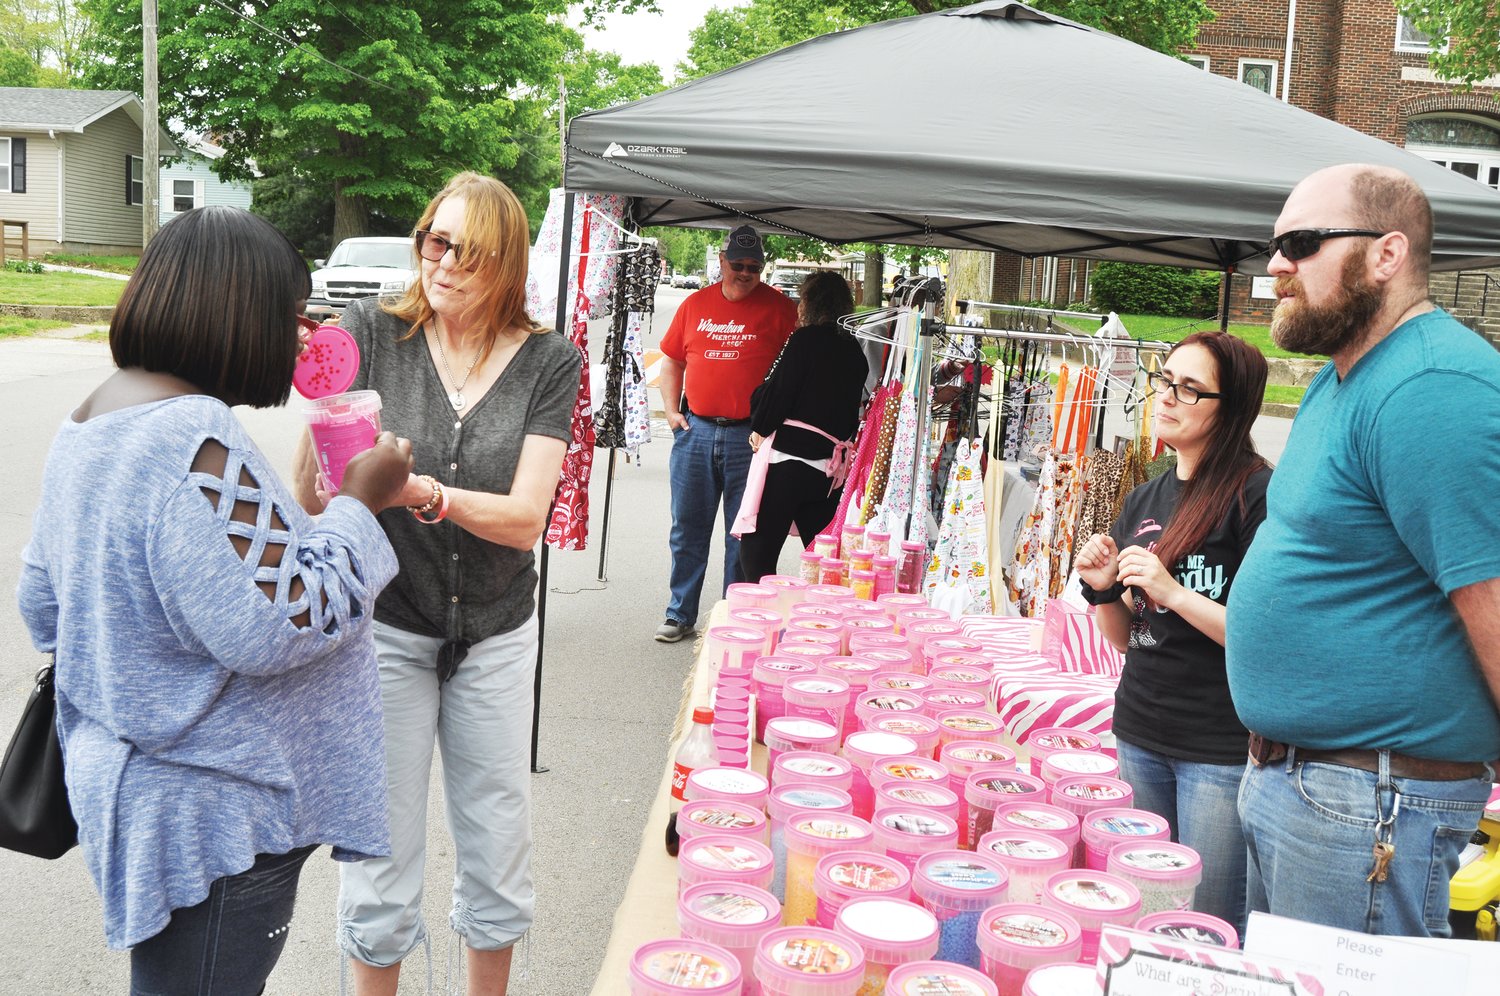 Glenda Slater, second from left, hands Mildred Sanders a fragrance to smell as Megan Slater (no relation to Glenda) and Jeremiah Wesley look on at the Pink Zebra booth at the Waynetown Street Fair in 2021. This year's festival, sponsored by the Waynetown Merchants Association, is set for May 14.